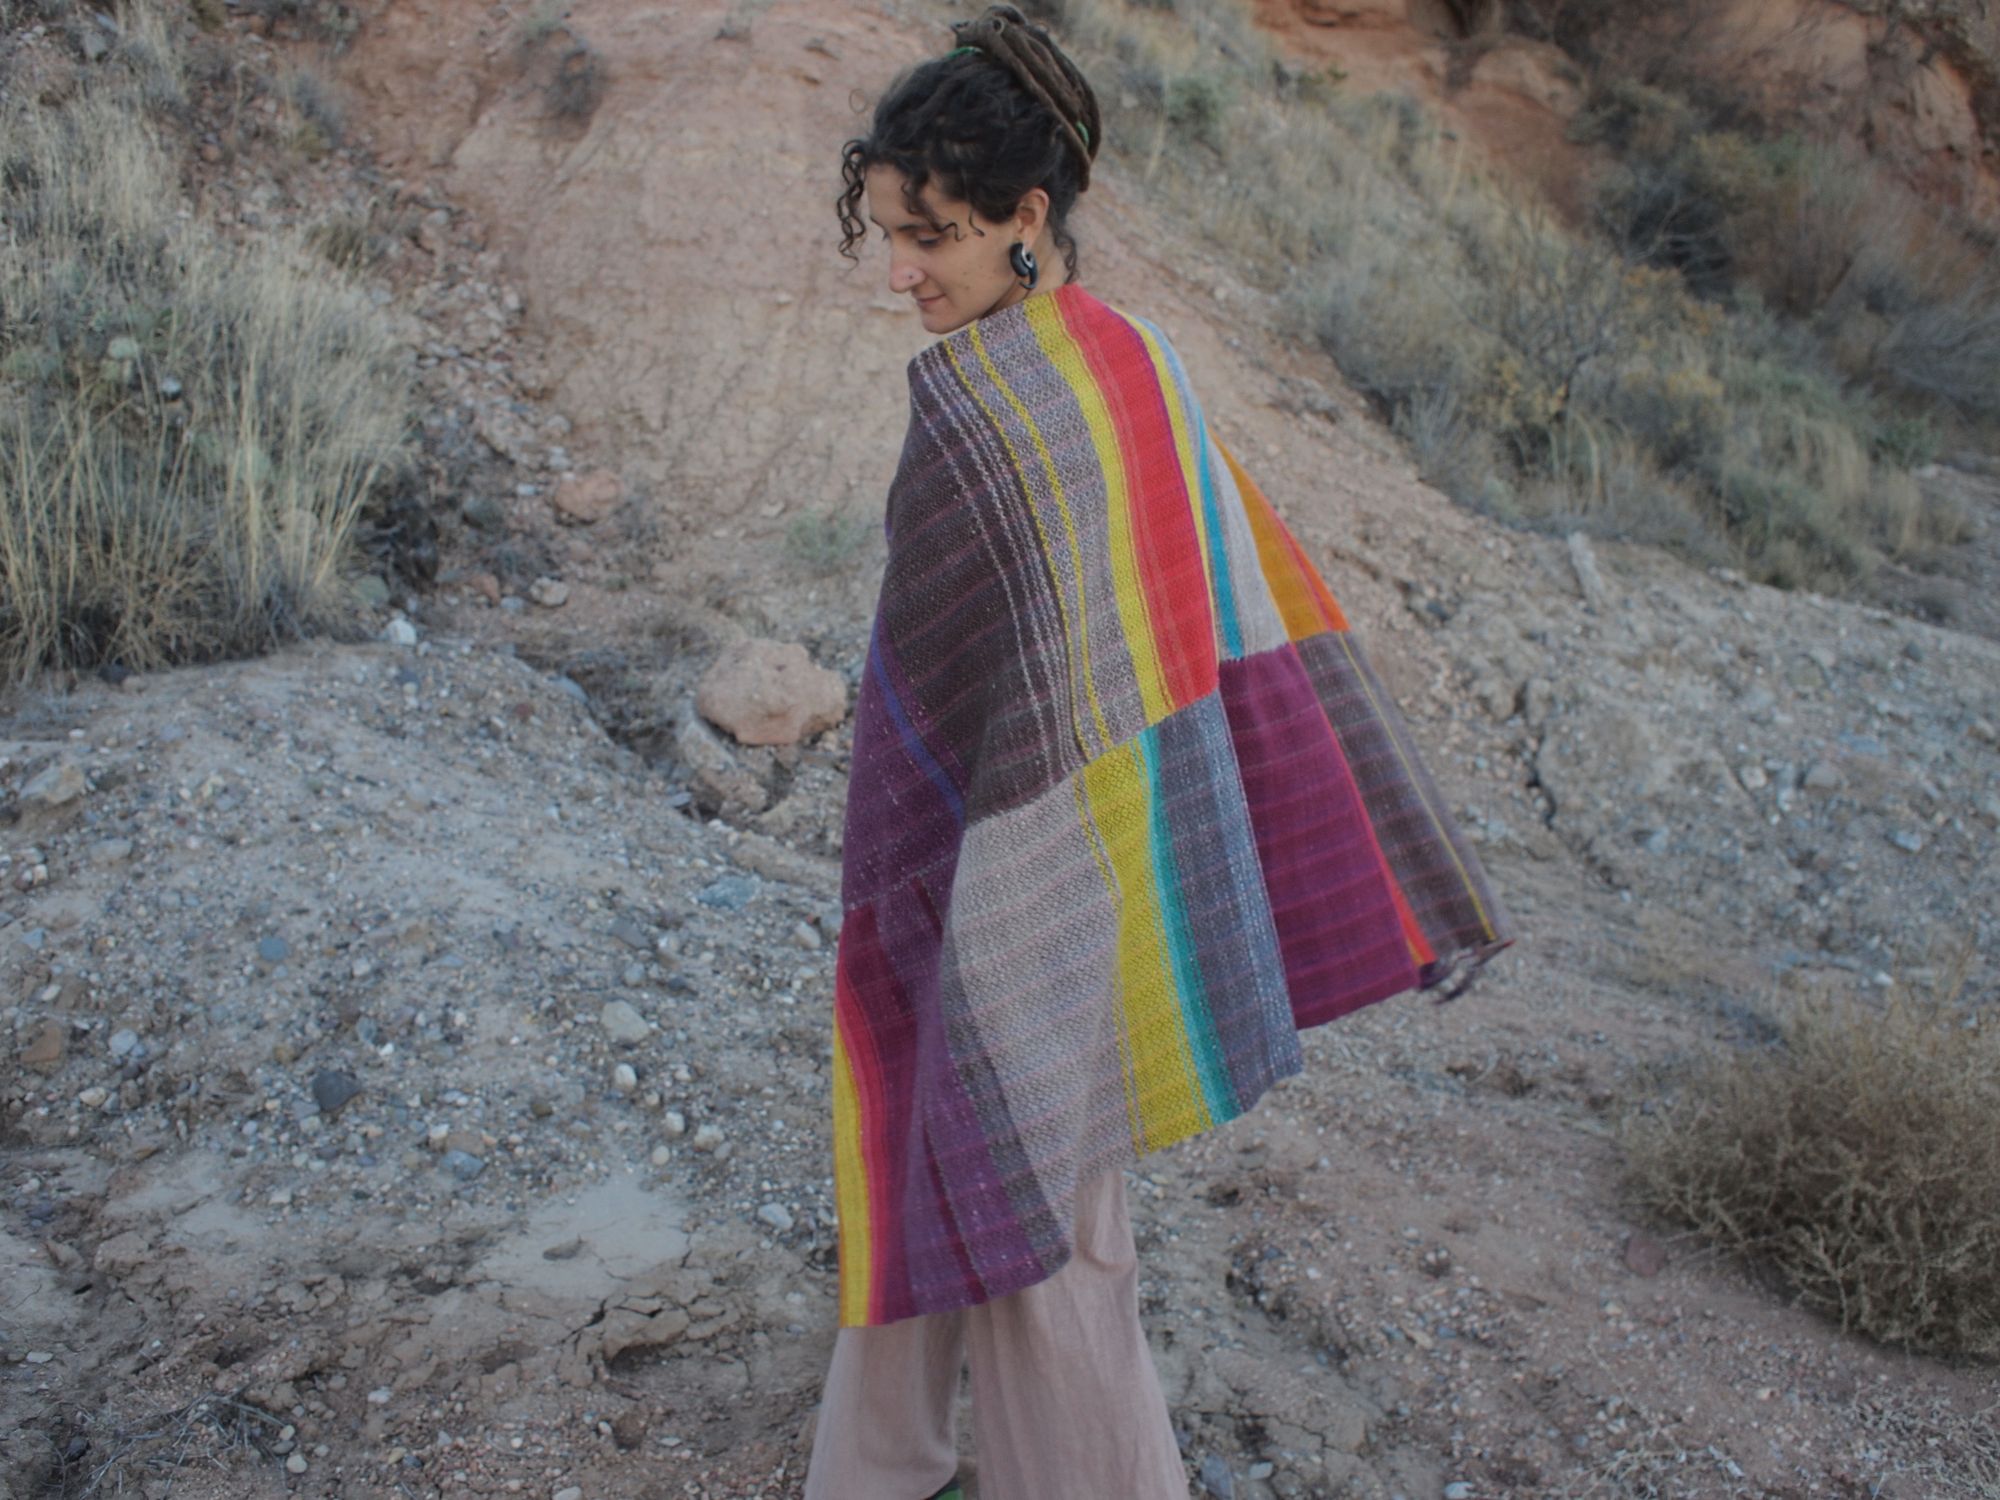 Woman in the desert, standing in dirt, wearing a blanket that is brown, grey, red, yellow, purple and blue